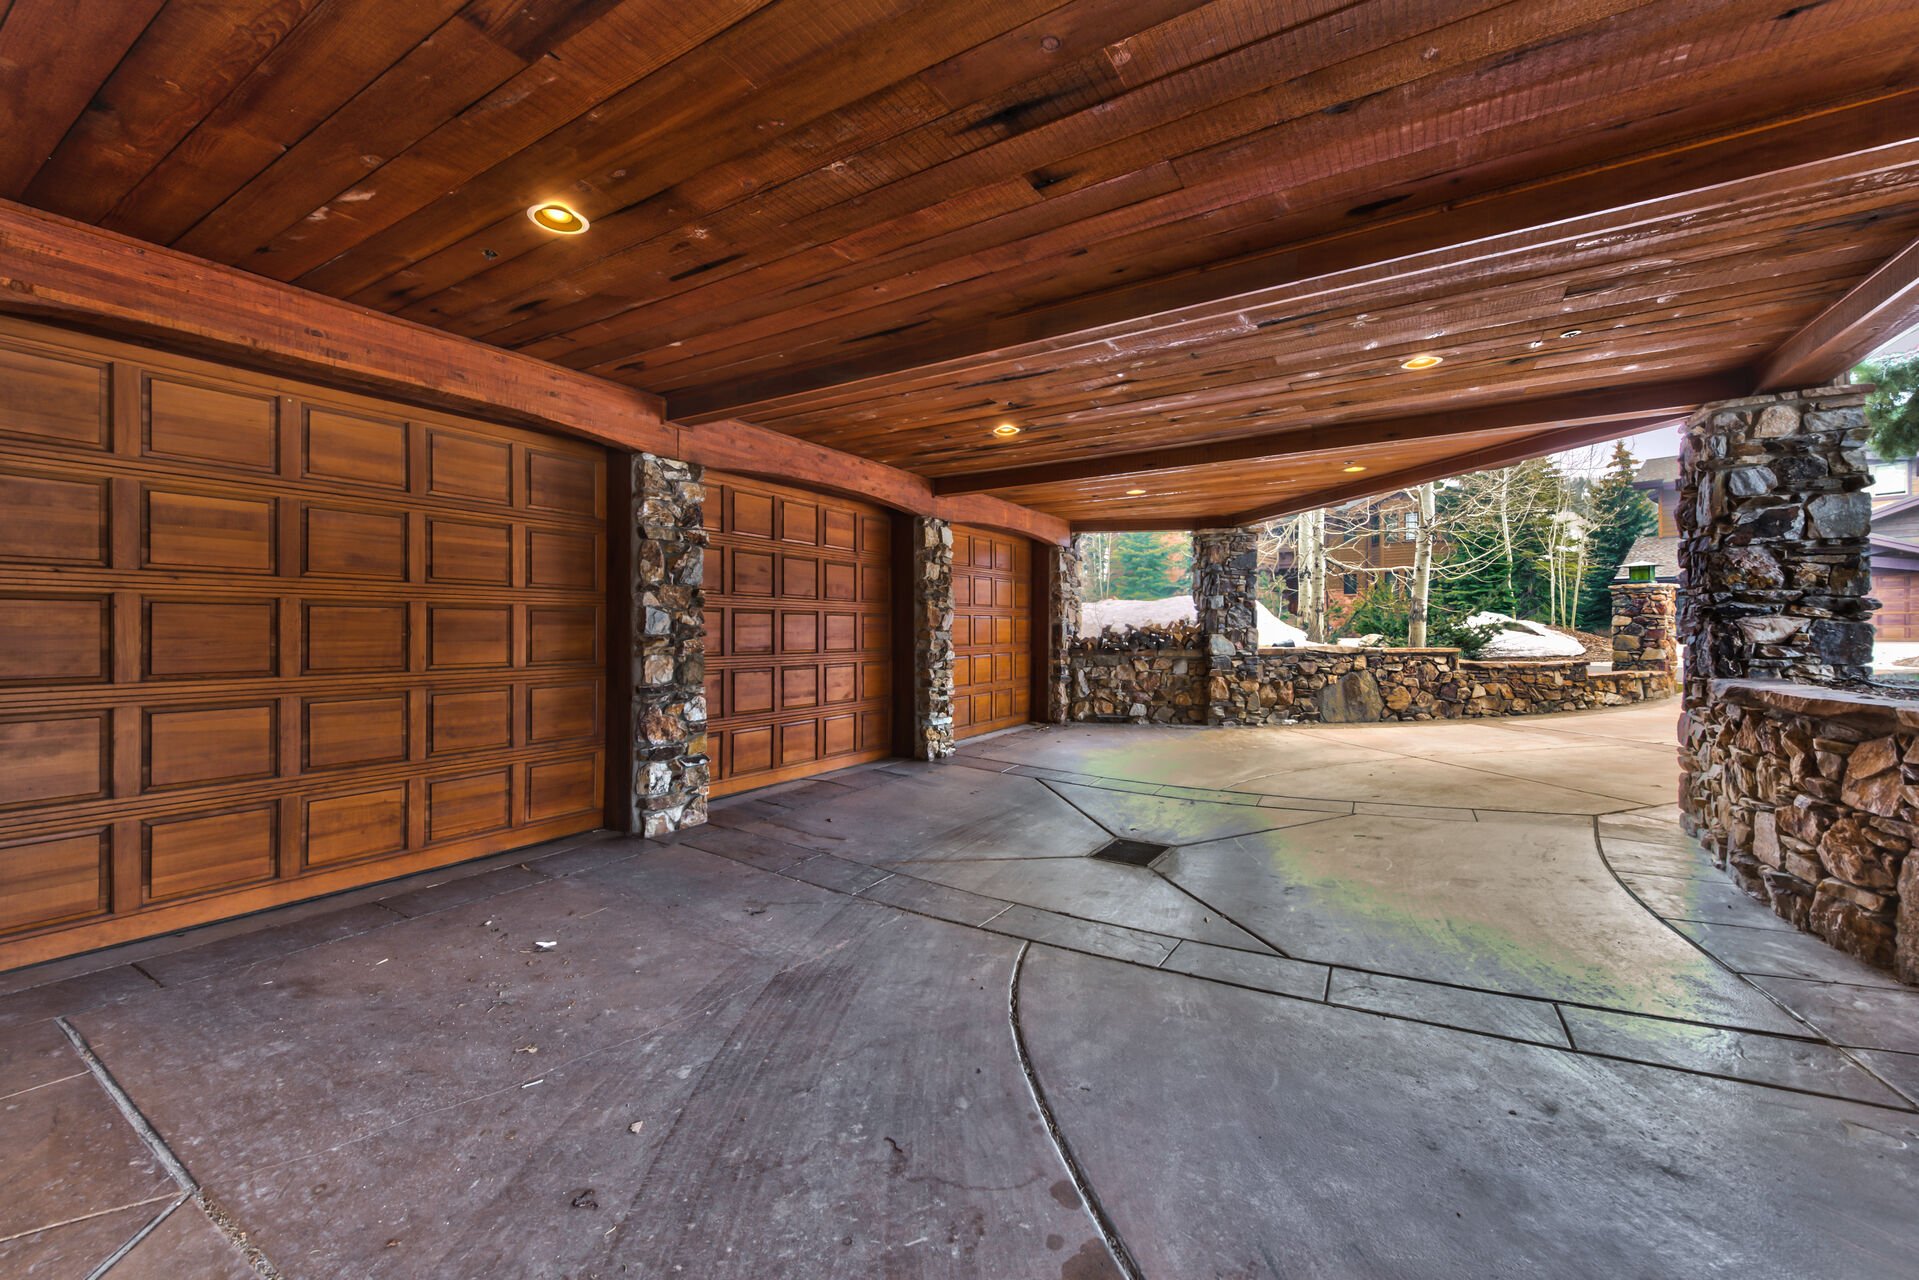 Garage Access from Driveway